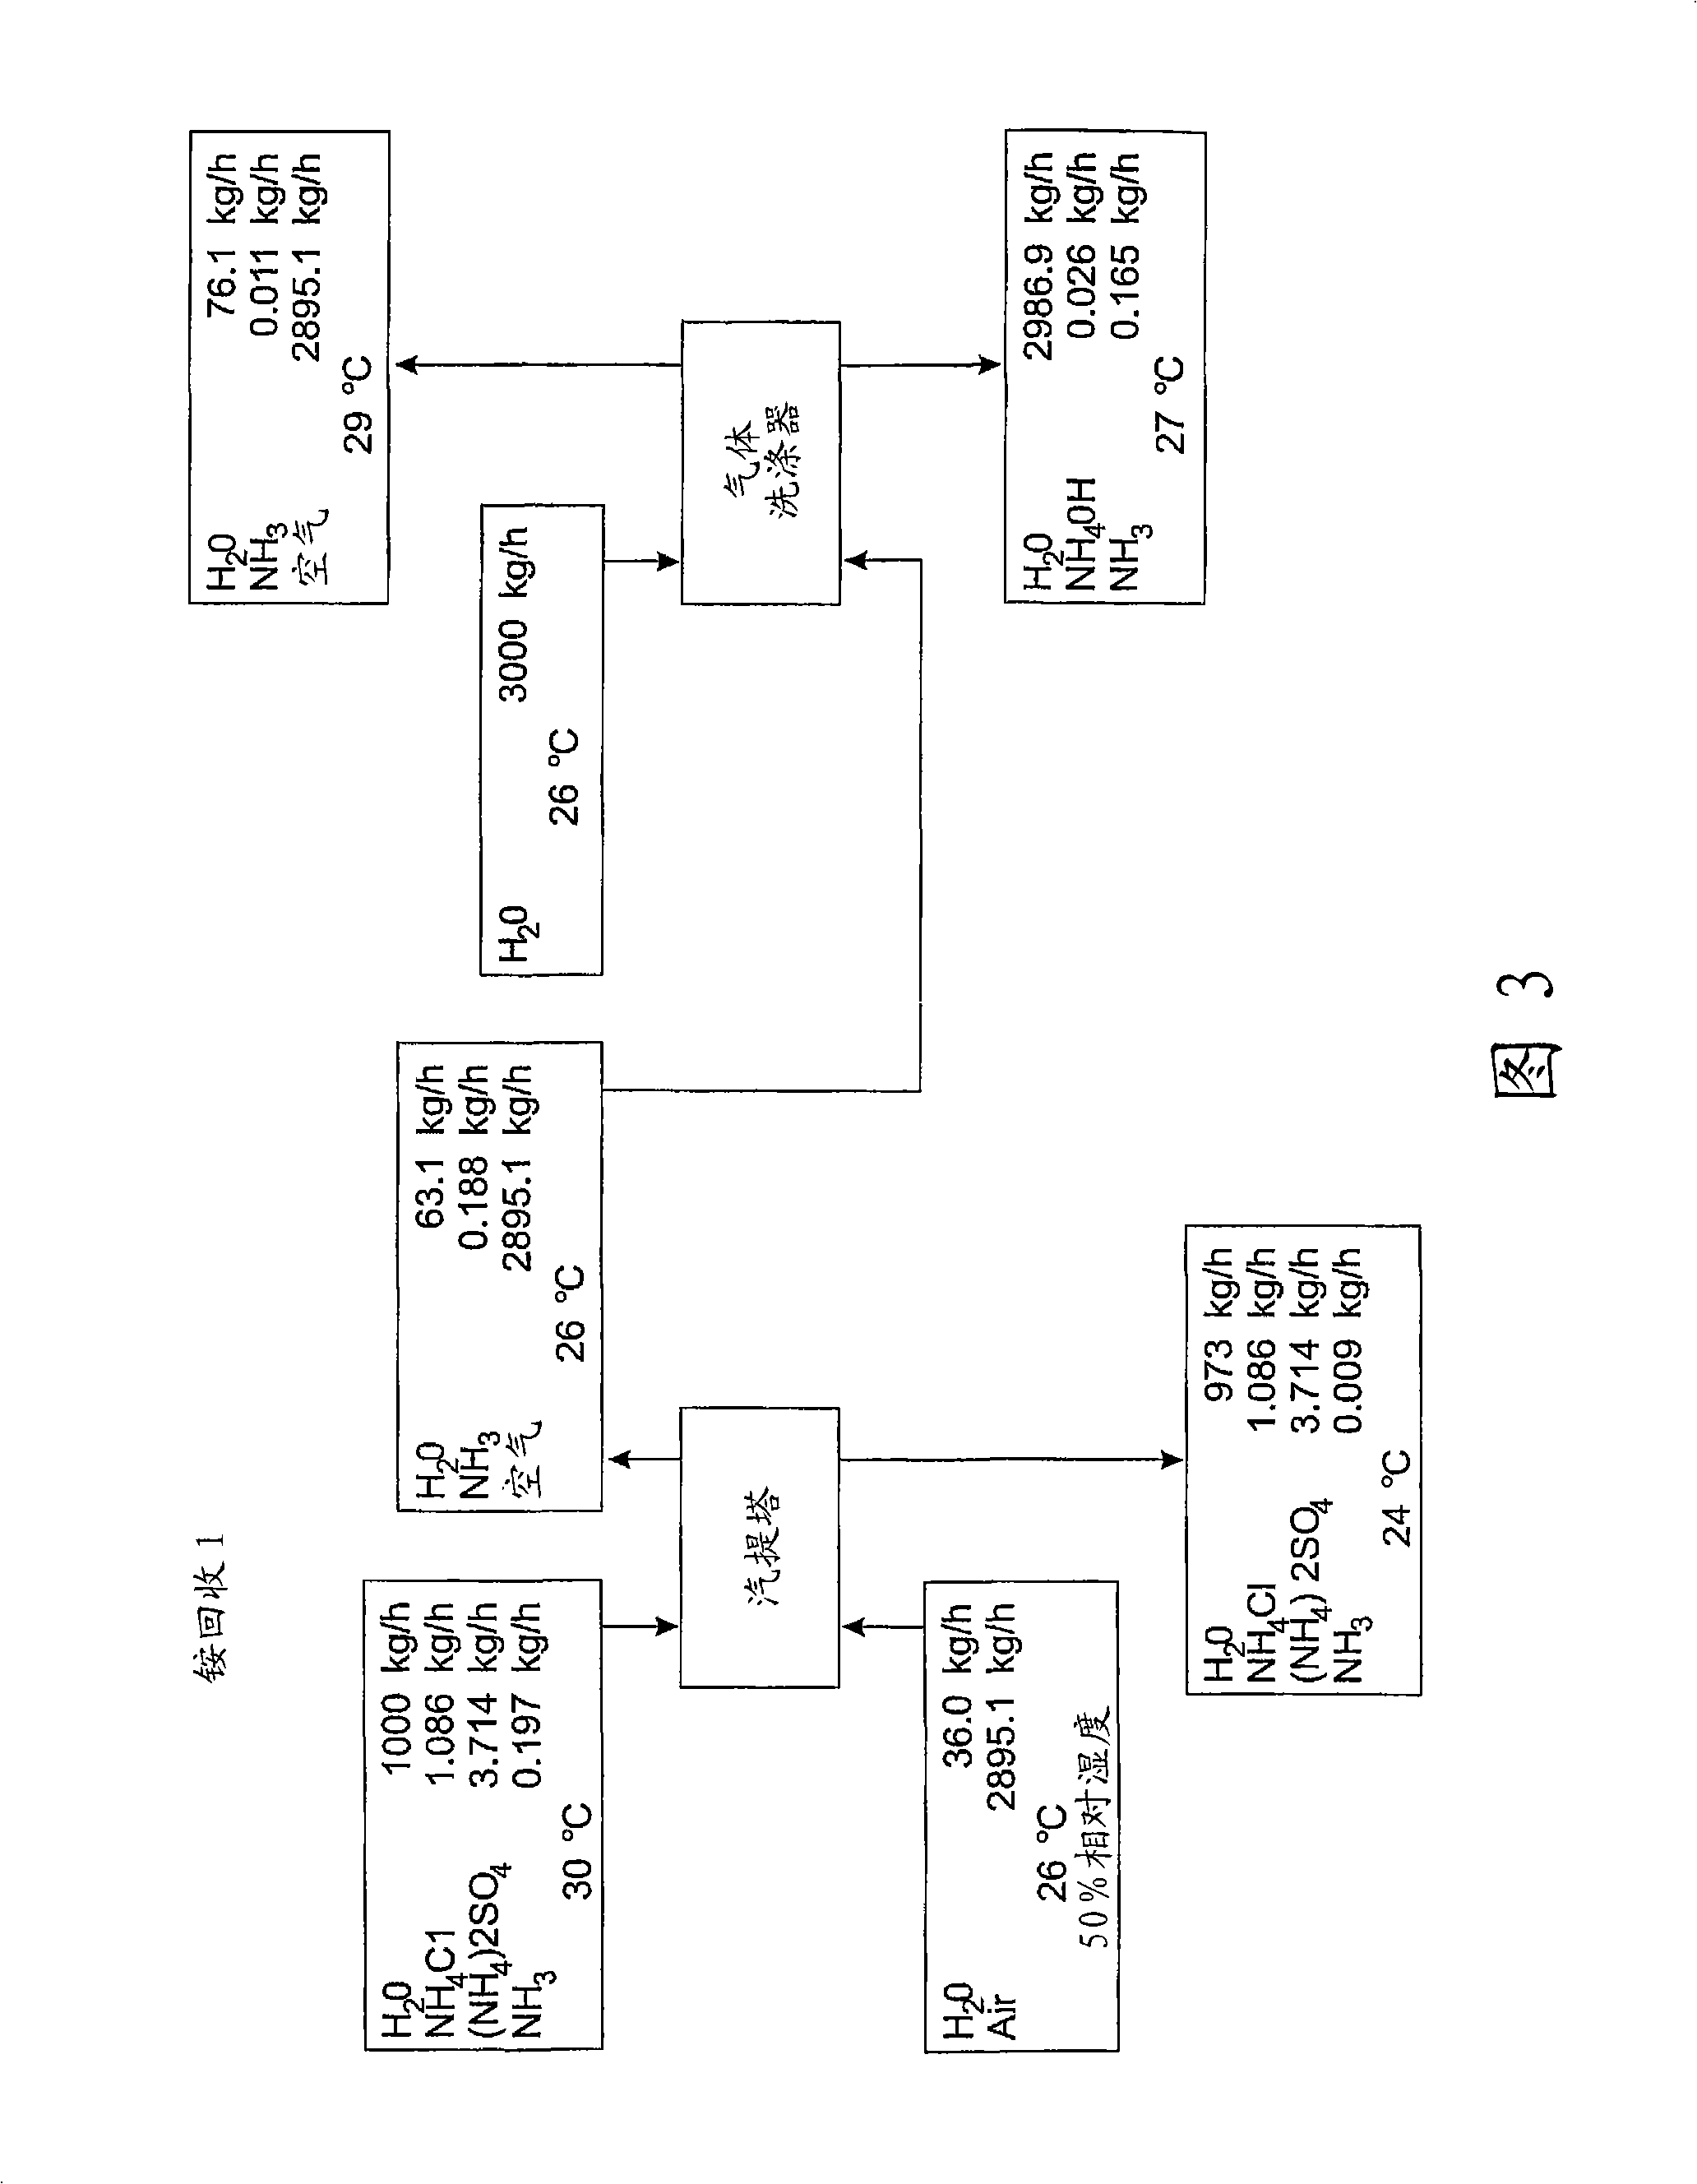 Methods of the purification and use of moderately saline water